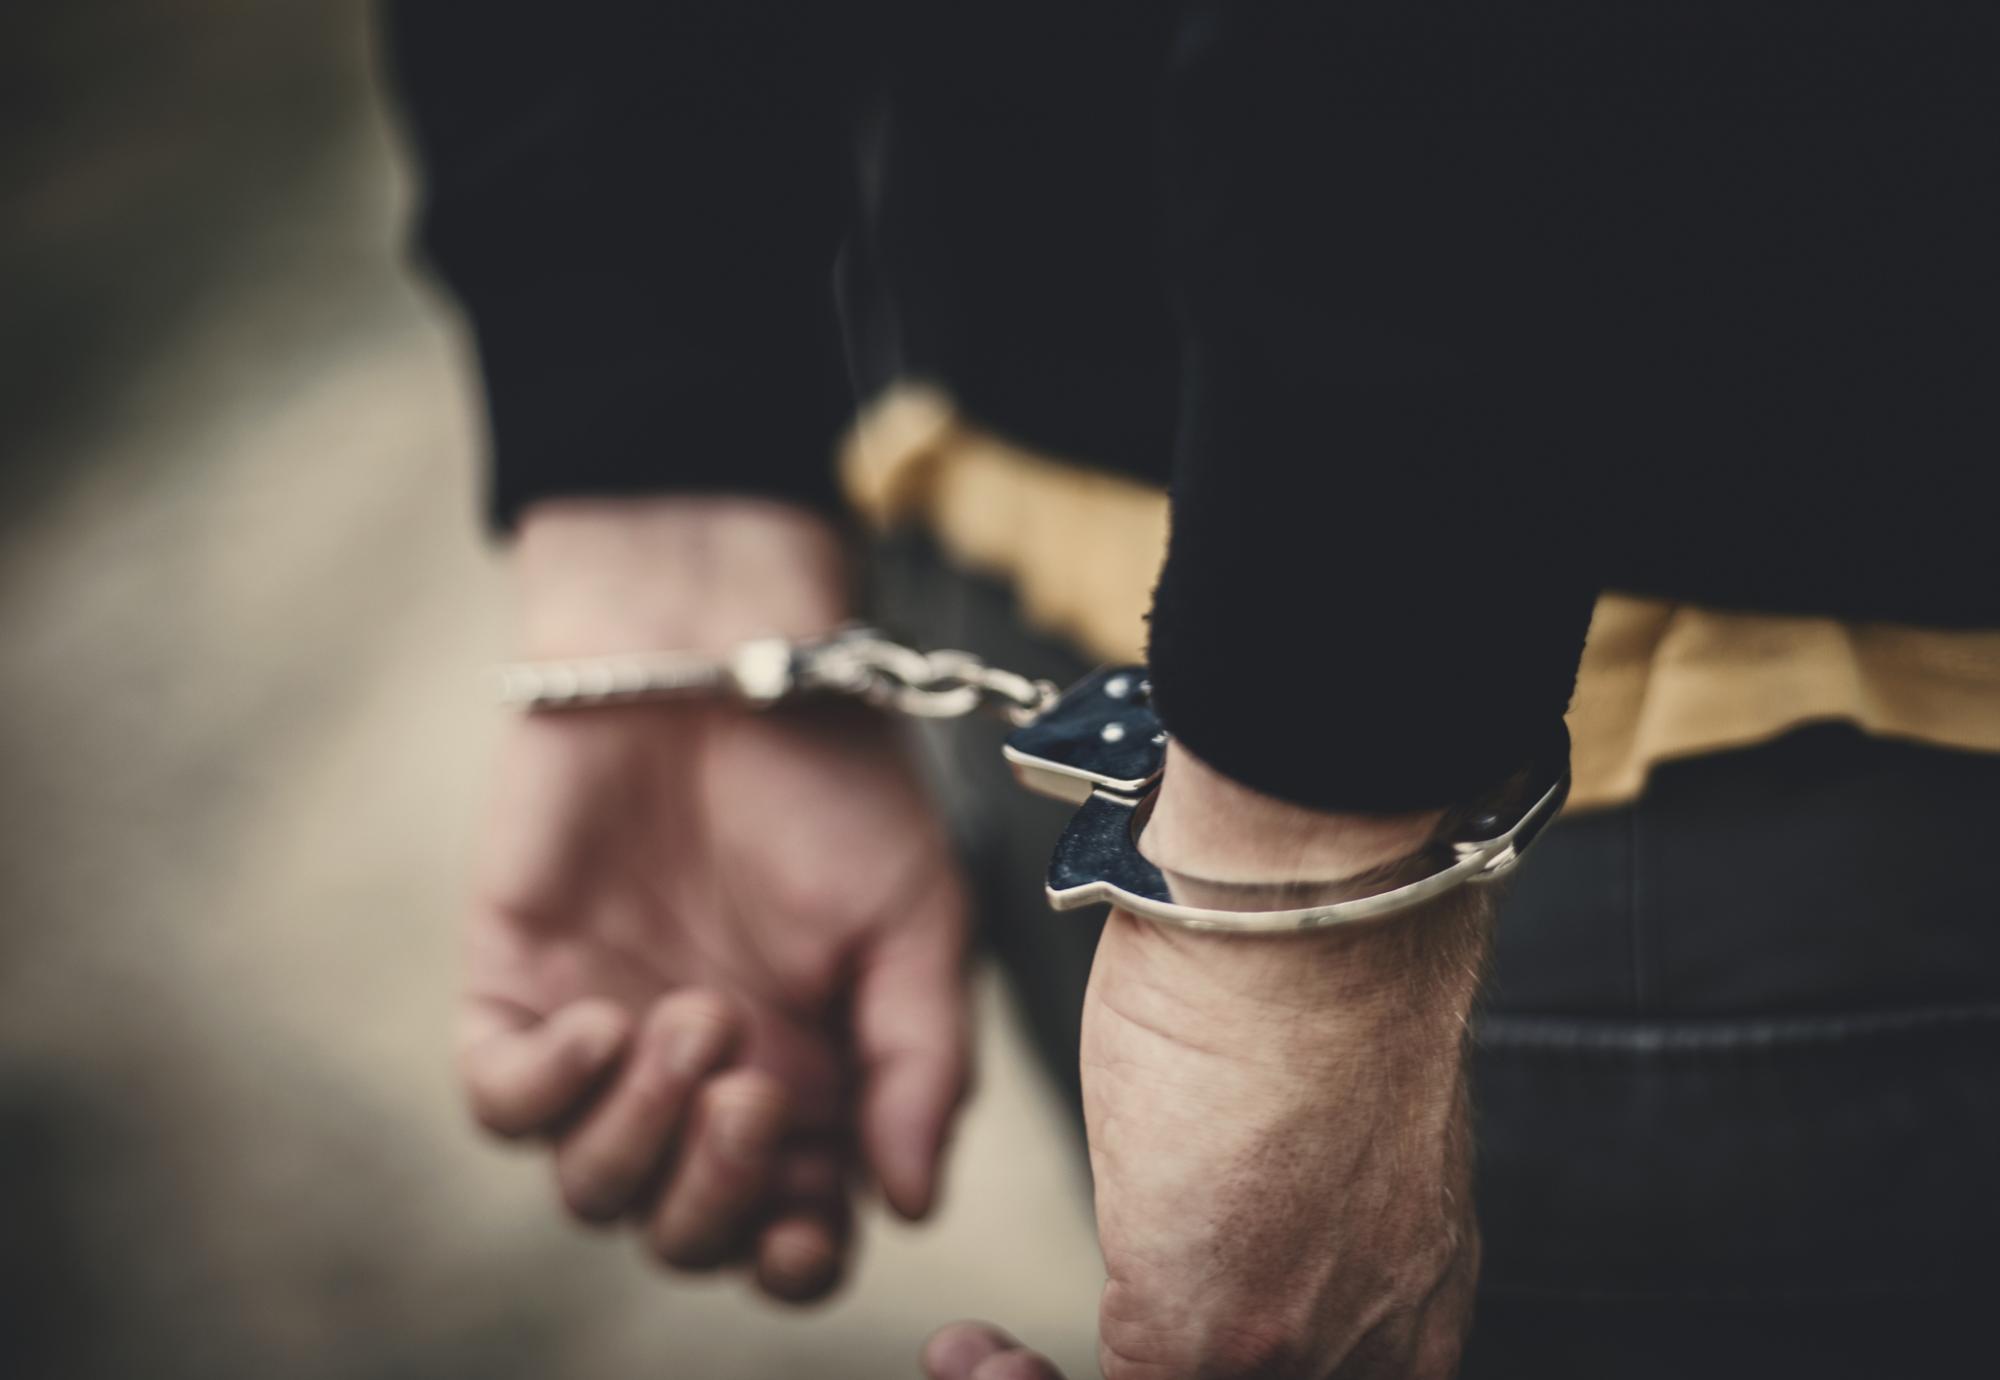 Man with arms behind his back in handcuffs.